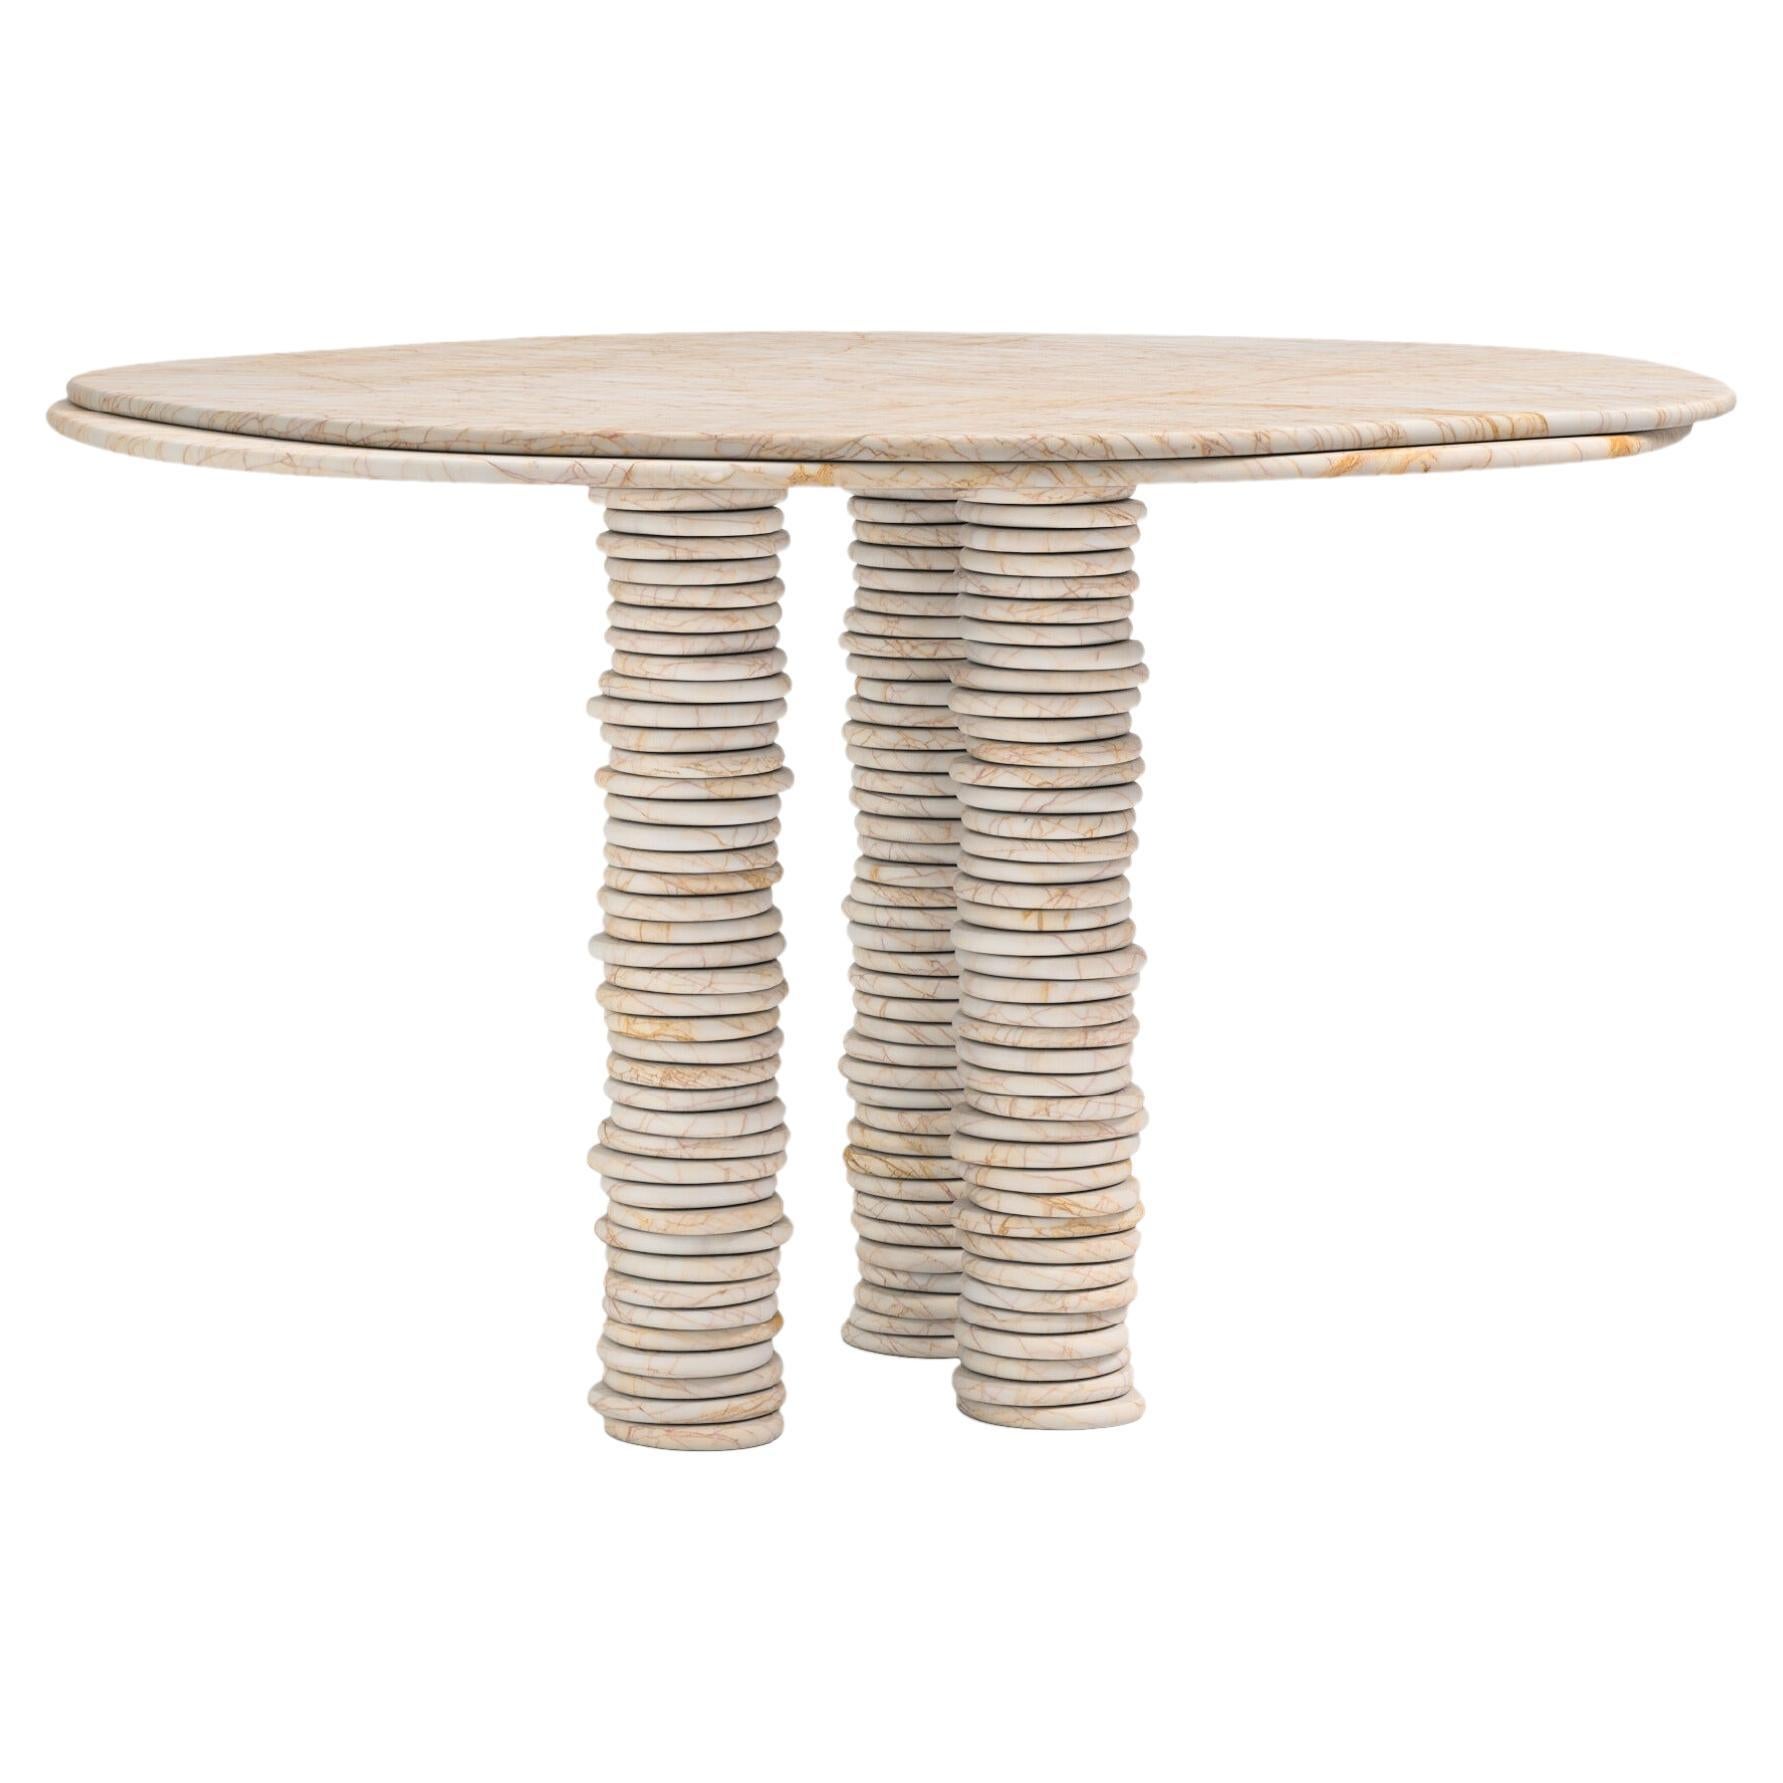 FORM(LA) Onda Round Dining Table 54”L x 54”W x 29”H Golden Spider Marble For Sale